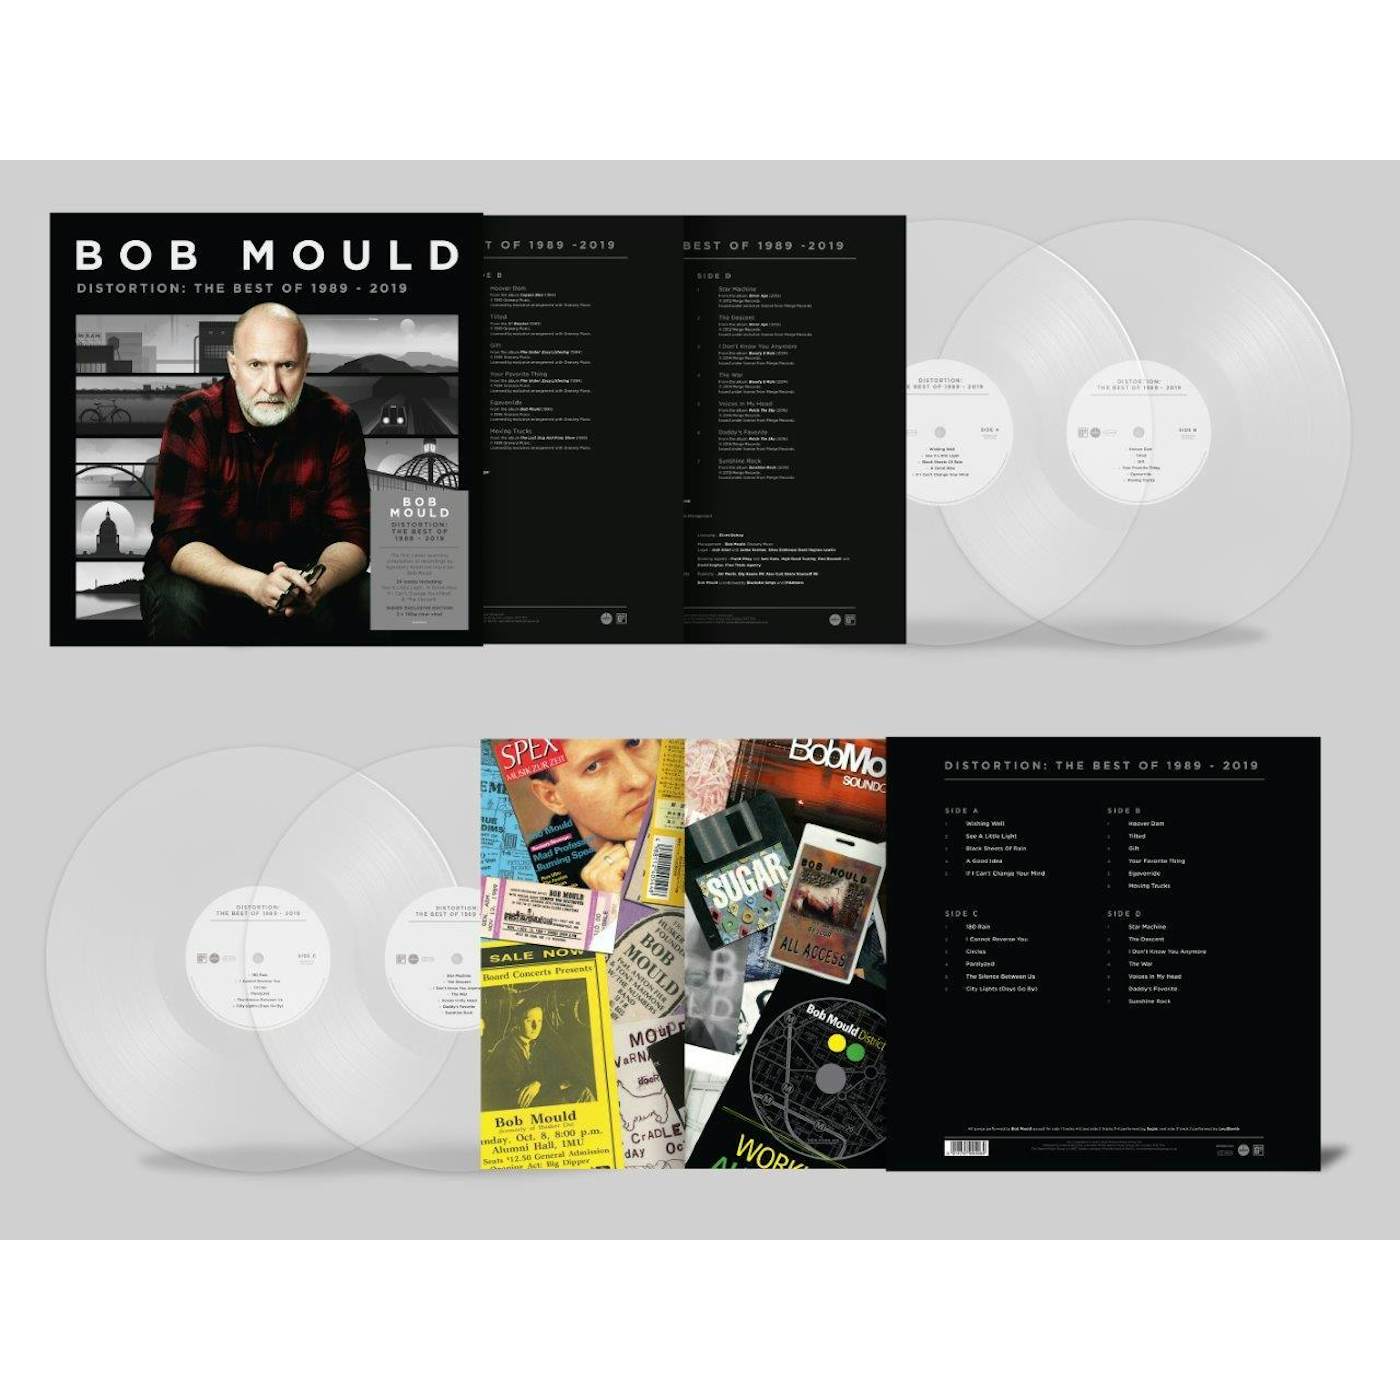 Bob Mould LP Vinyl Record - Distortion: The Best Of 19 89-20. 19  (Indies Exclusive) (Clear Vinyl)